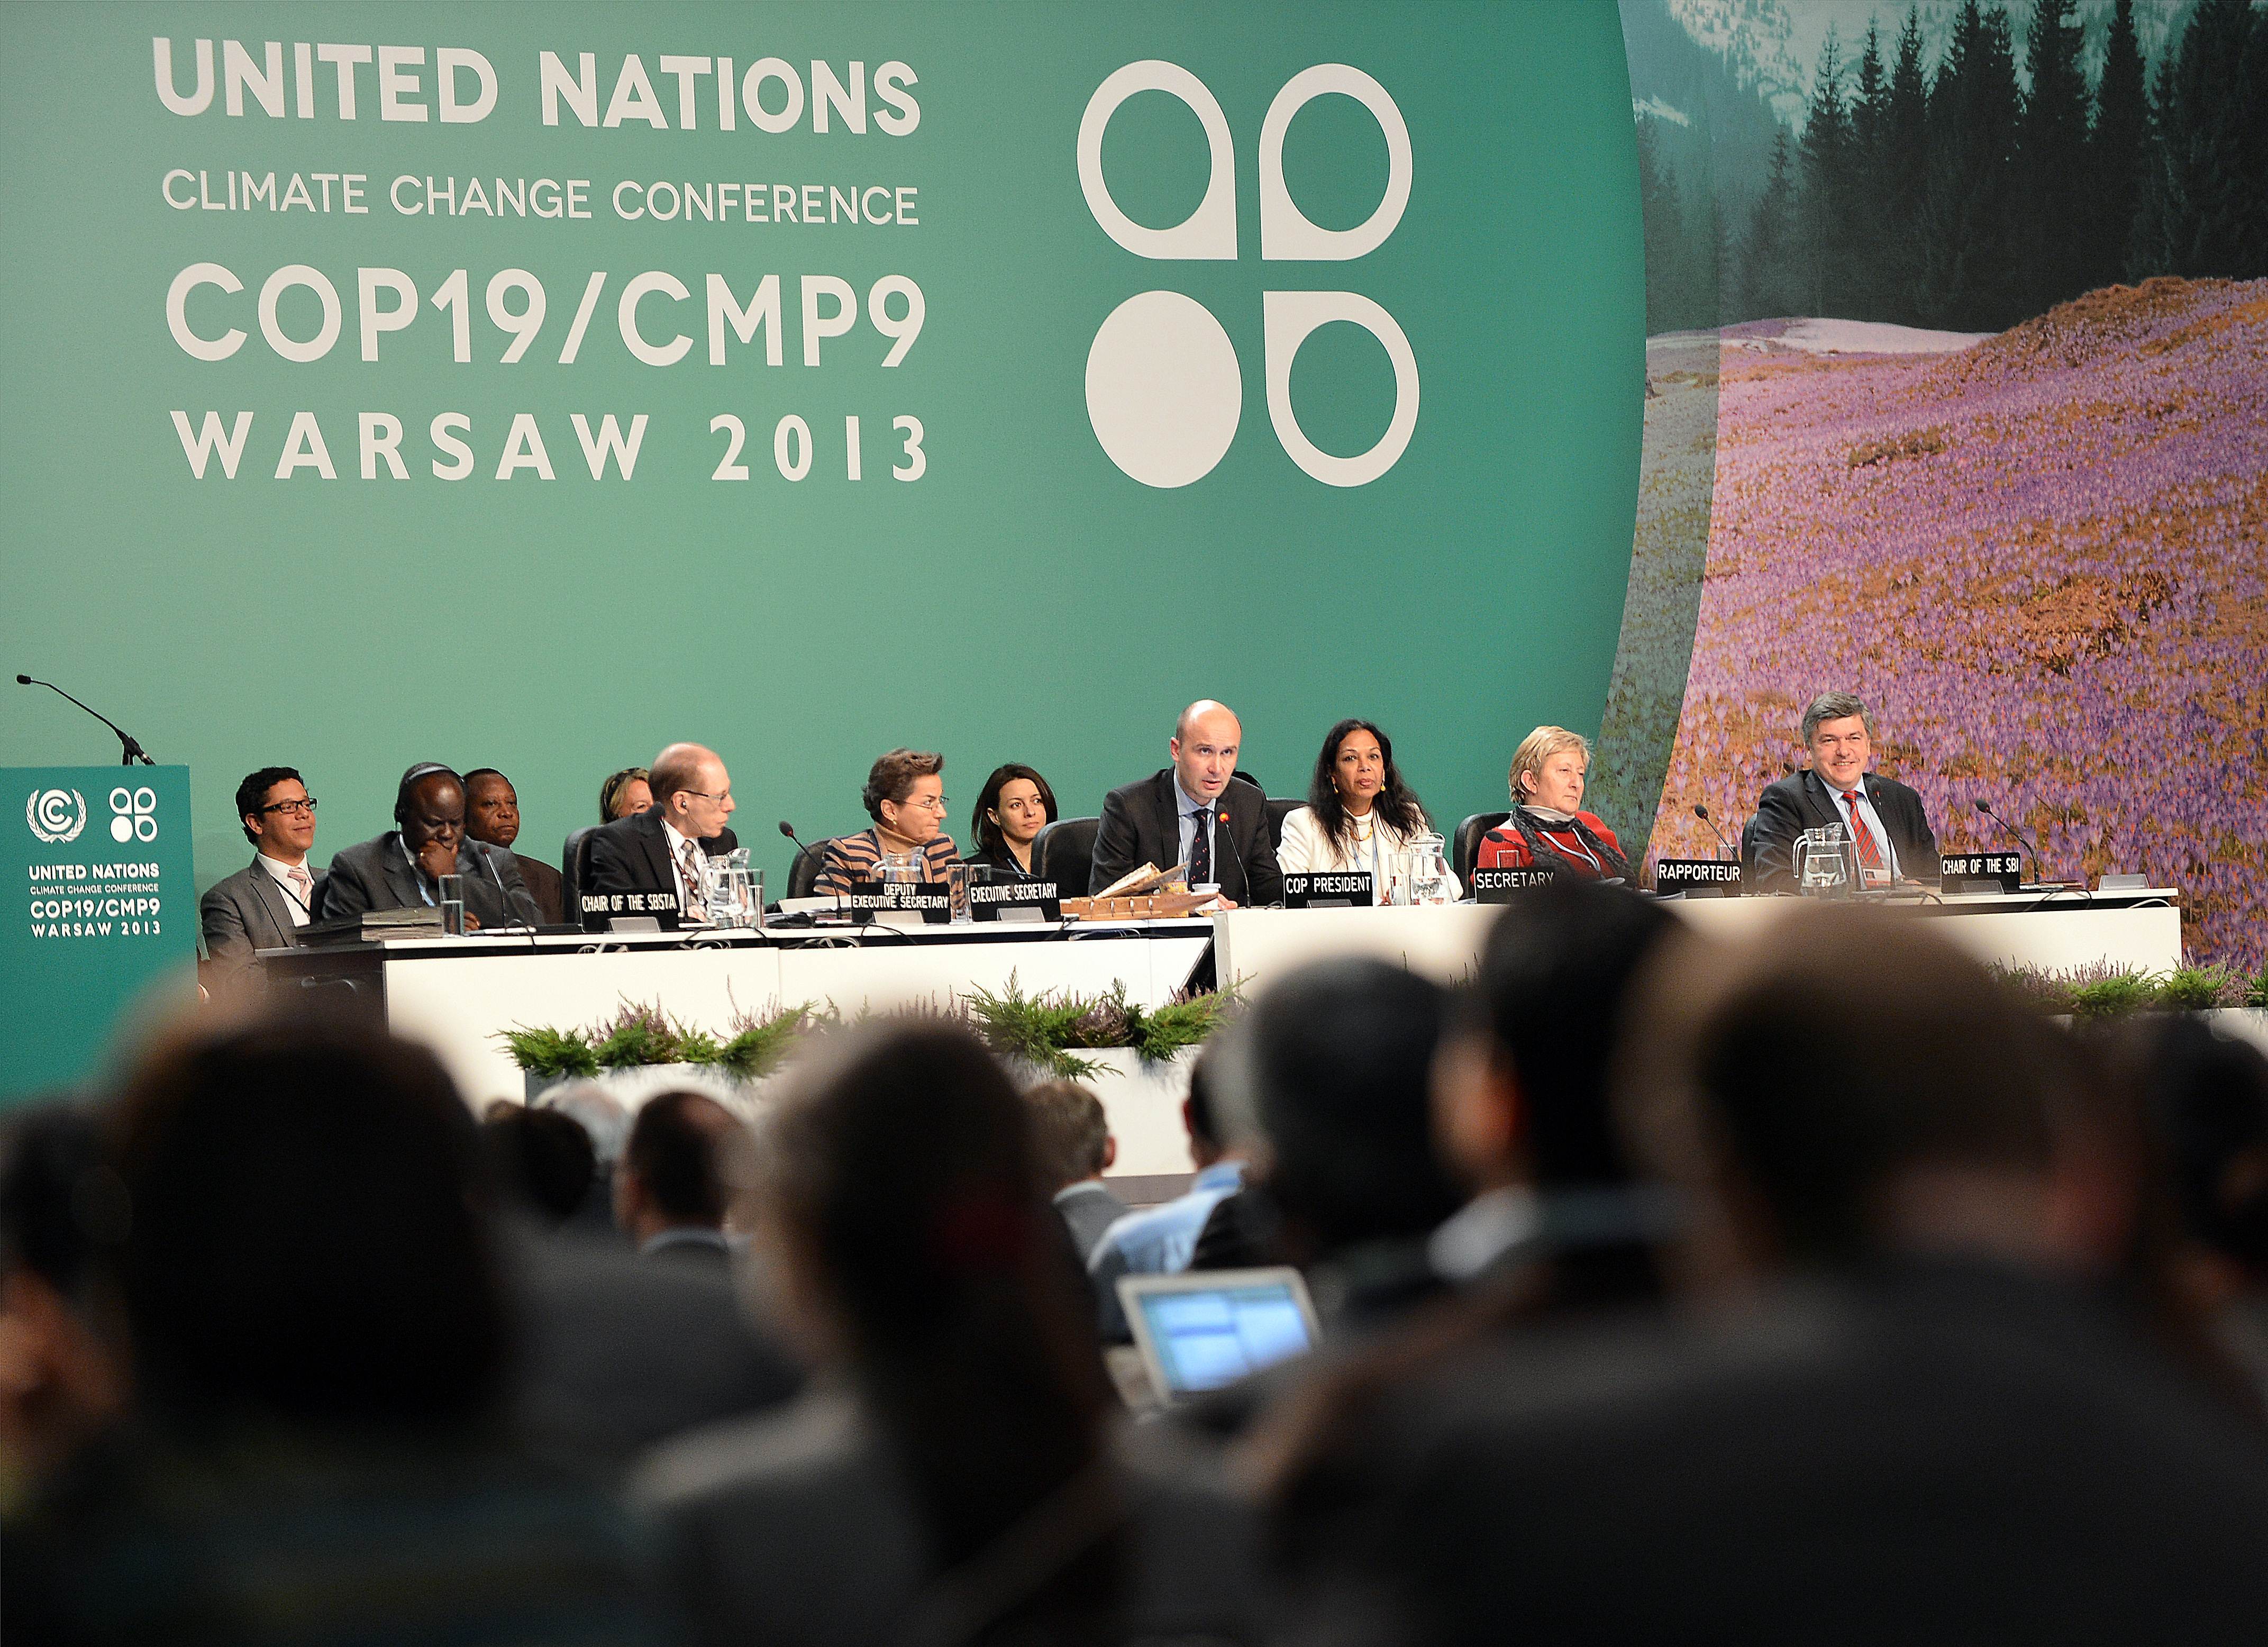 19th conference of the United Nations Framework Convention on Climate Change COP19 in Warsaw. Photo: AFP